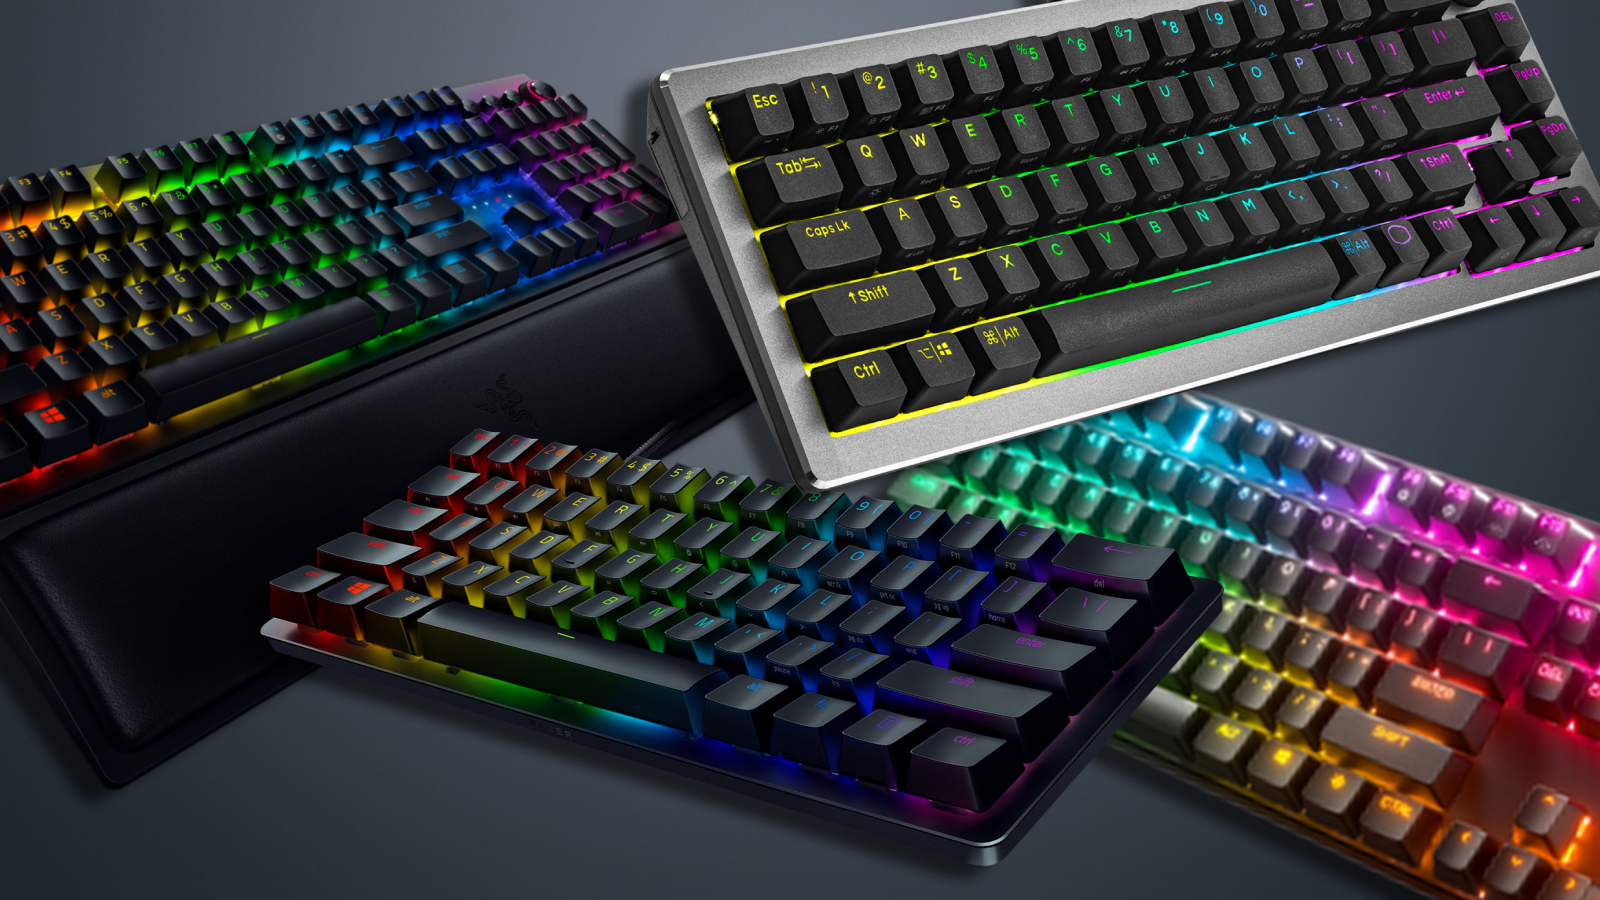 Introducing the Apex 9 TKL and Mini Gaming Keyboards